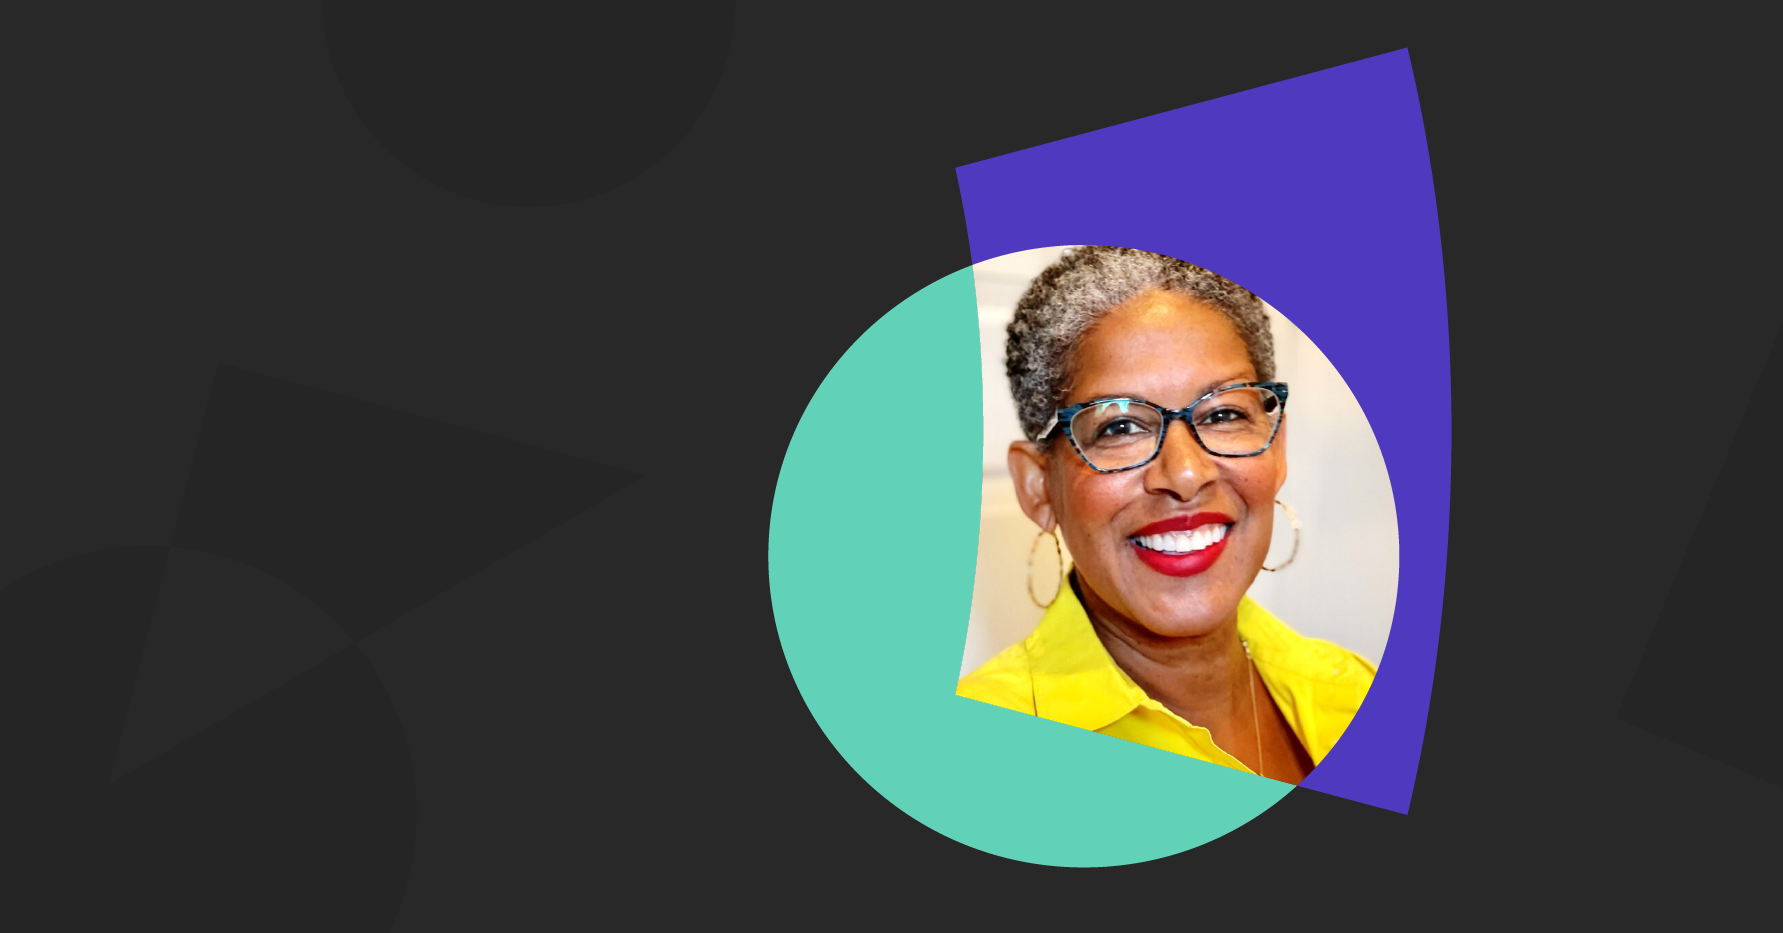 Banner image featuring a headshot photograph of Kiwoba Allaire, Head of Diversity, Equity, and Inclusion at Clari